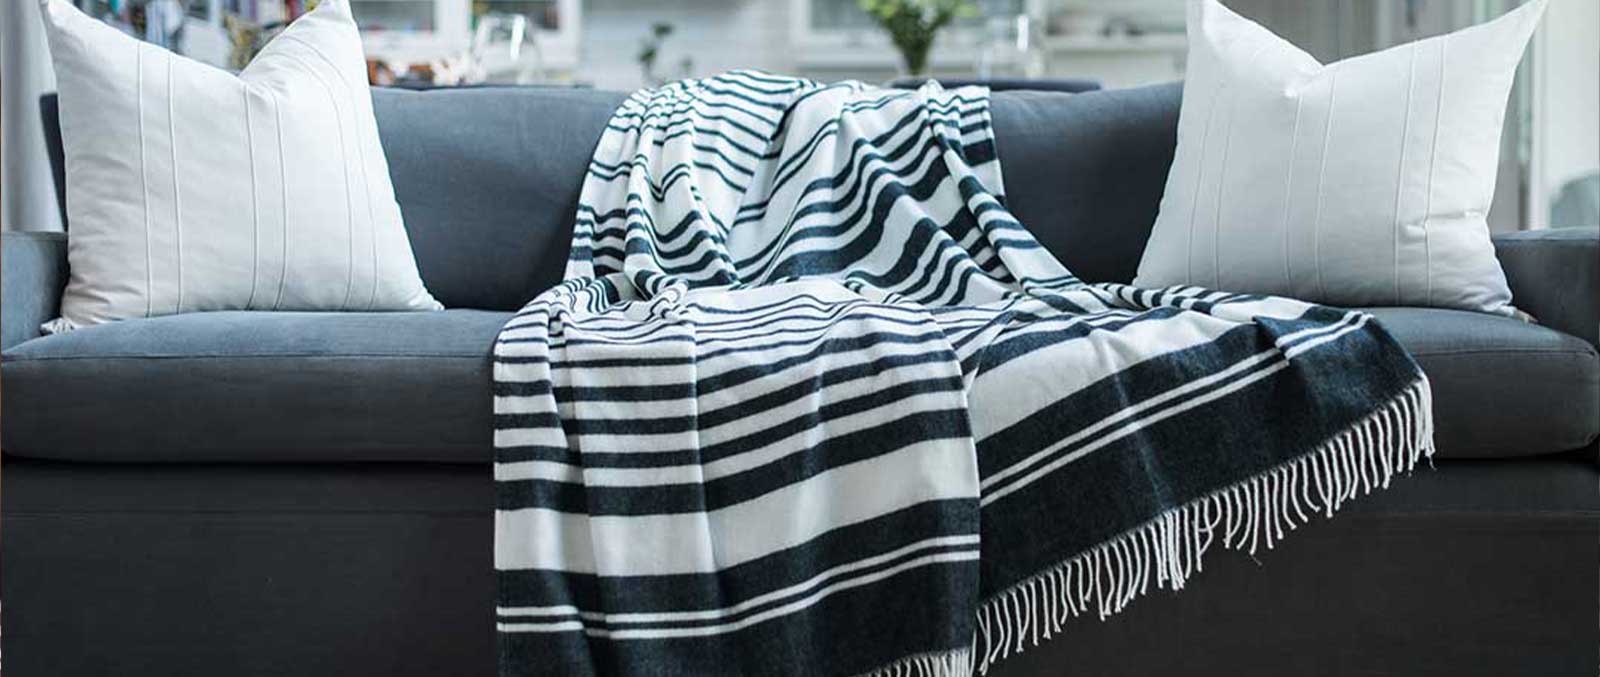 Xhosa Tribal african black and white striped blanket lying on a couch in African home 